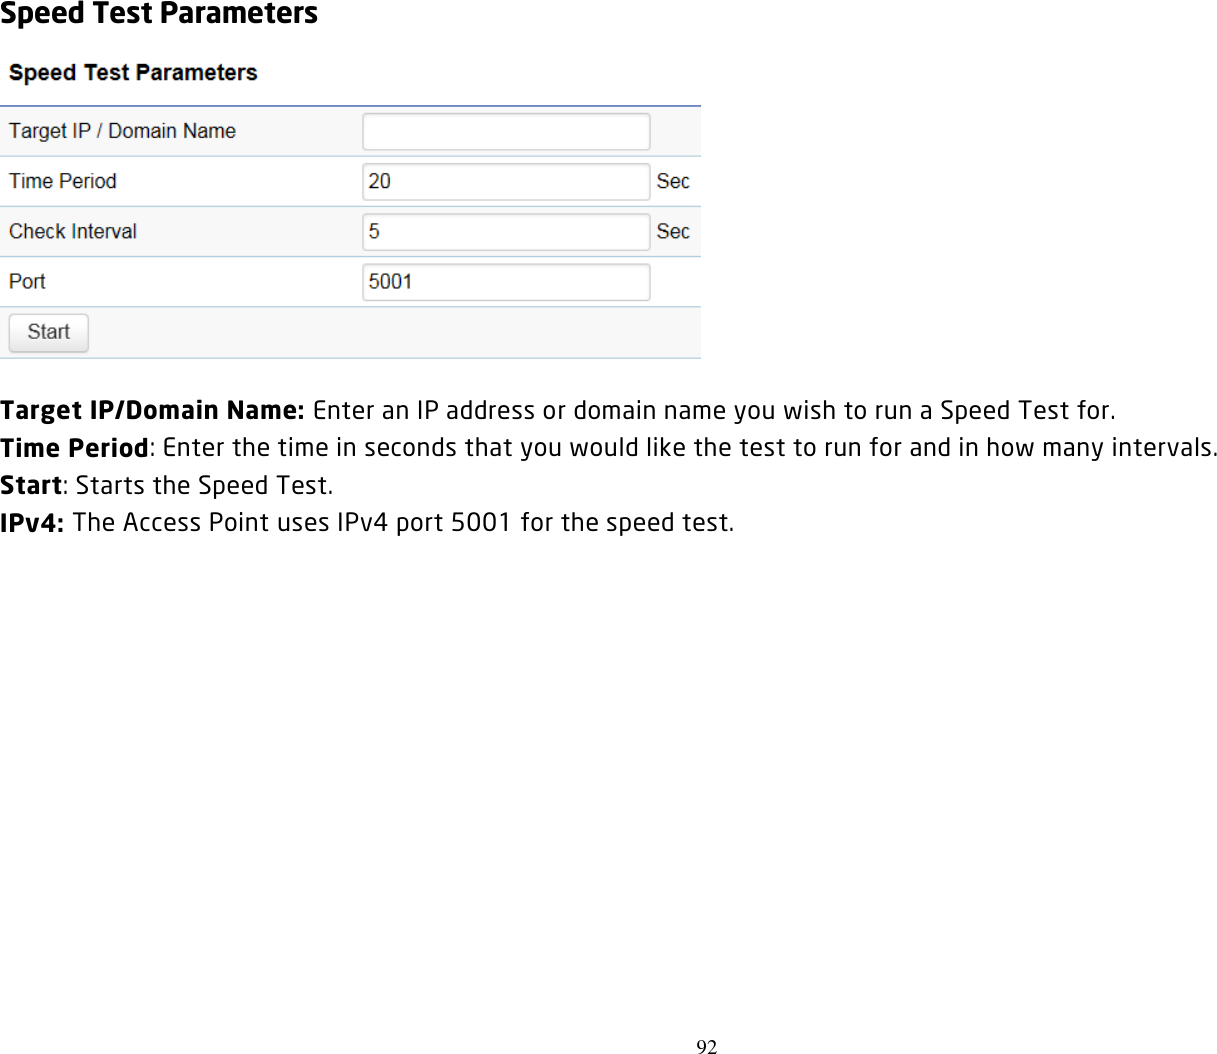 92  Speed Test Parameters  Target IP/Domain Name: Enter an IP address or domain name you wish to run a Speed Test for. Time Period: Enter the time in seconds that you would like the test to run for and in how many intervals. Start: Starts the Speed Test. IPv4: The Access Point uses IPv4 port 5001 for the speed test.  